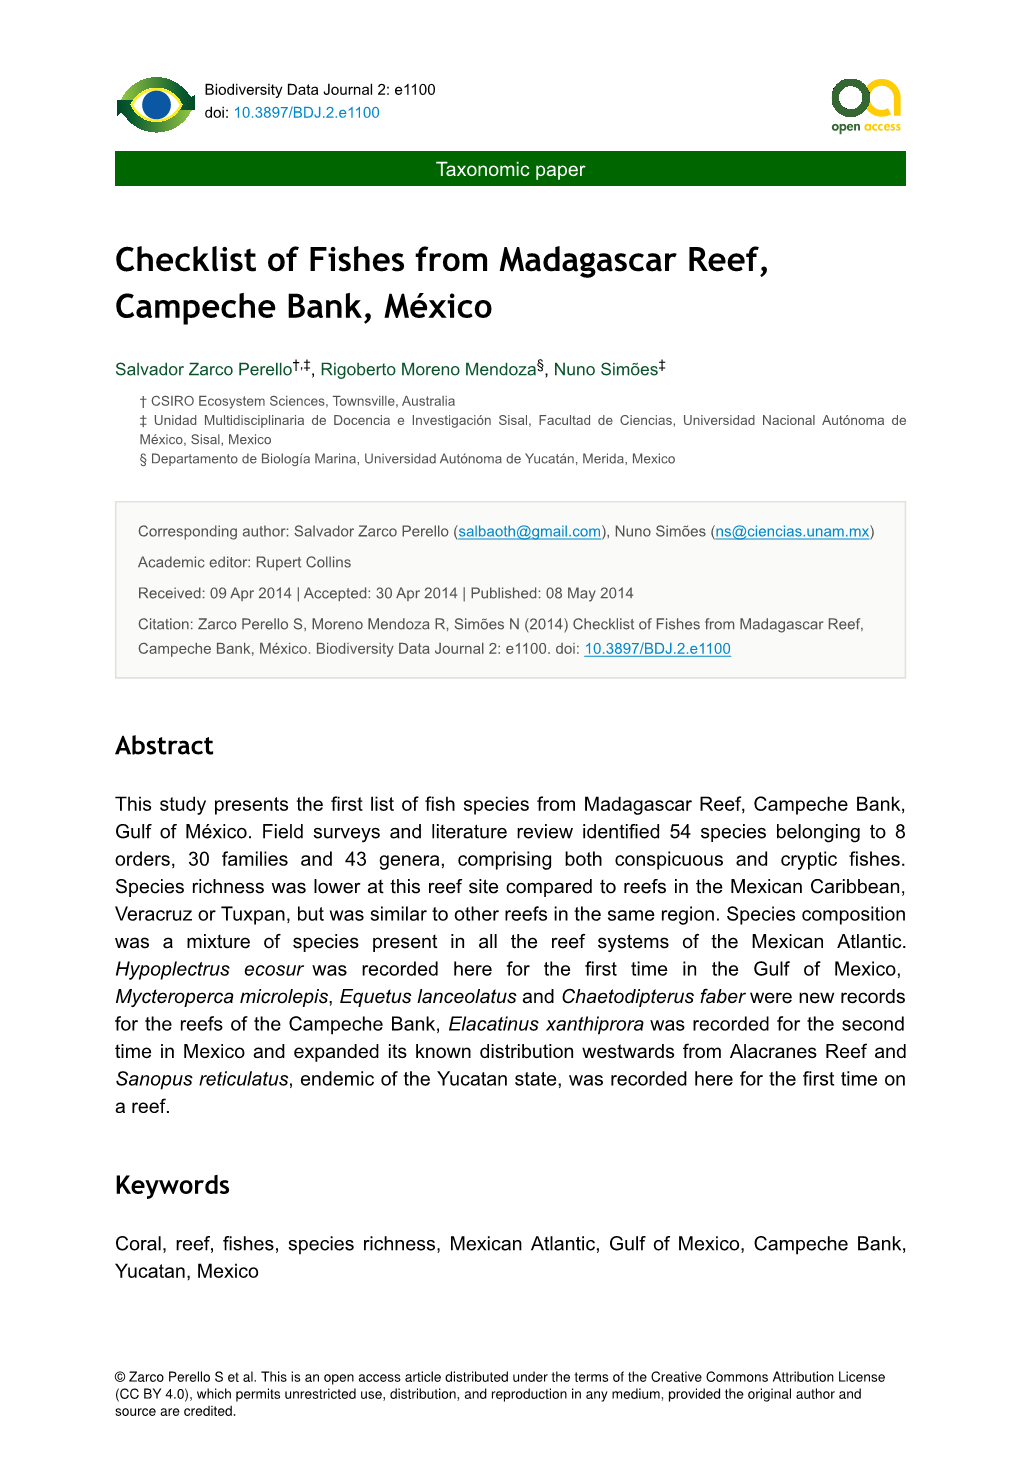 Checklist of Fishes from Madagascar Reef, Campeche Bank, México